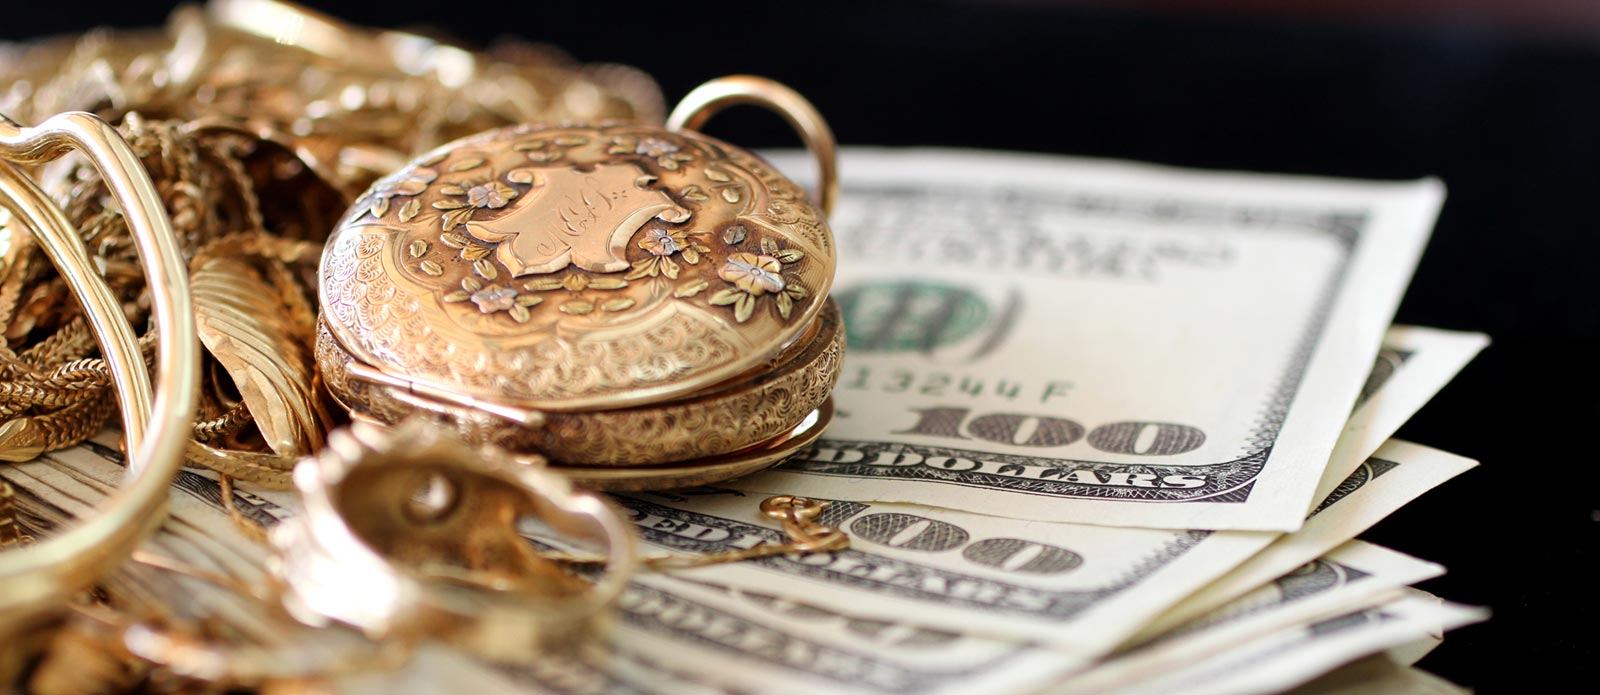 The Best Time to Sell Your Gold Is Now - Fashcash Pawn & Checkcashers